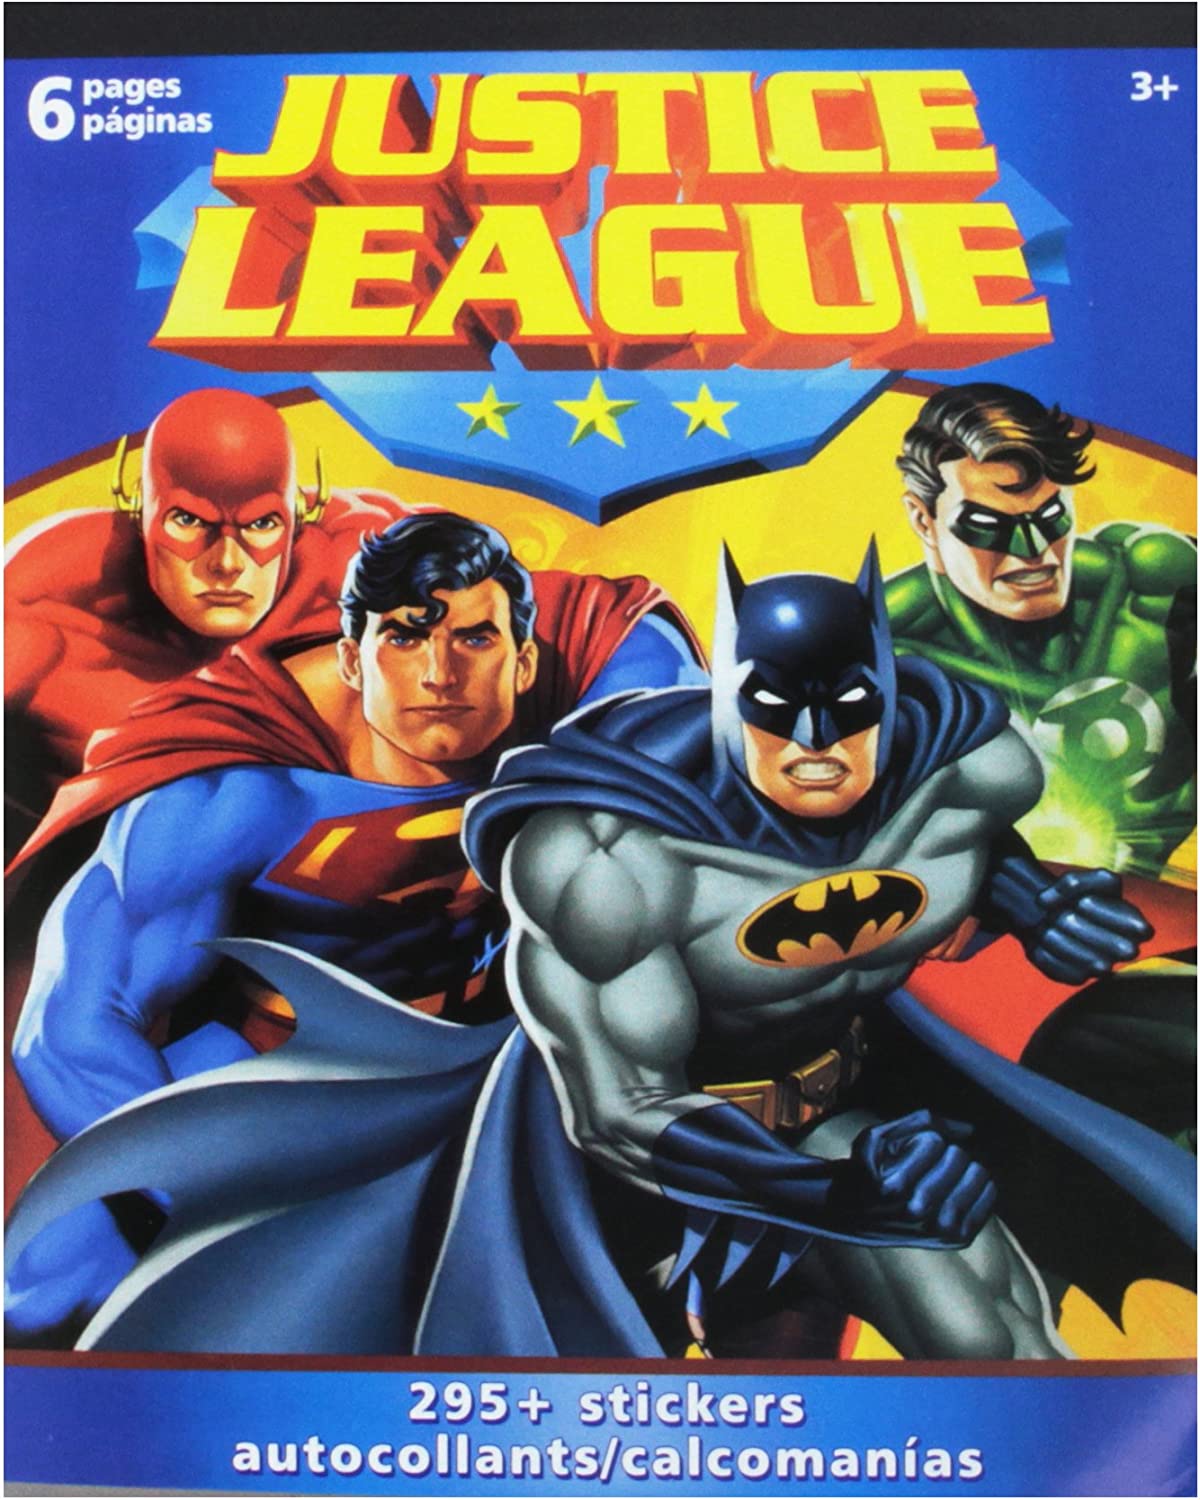 Sandy Lion Justice League Stickerland Pad, 295 Stickers - 4 Pages Stickers Book